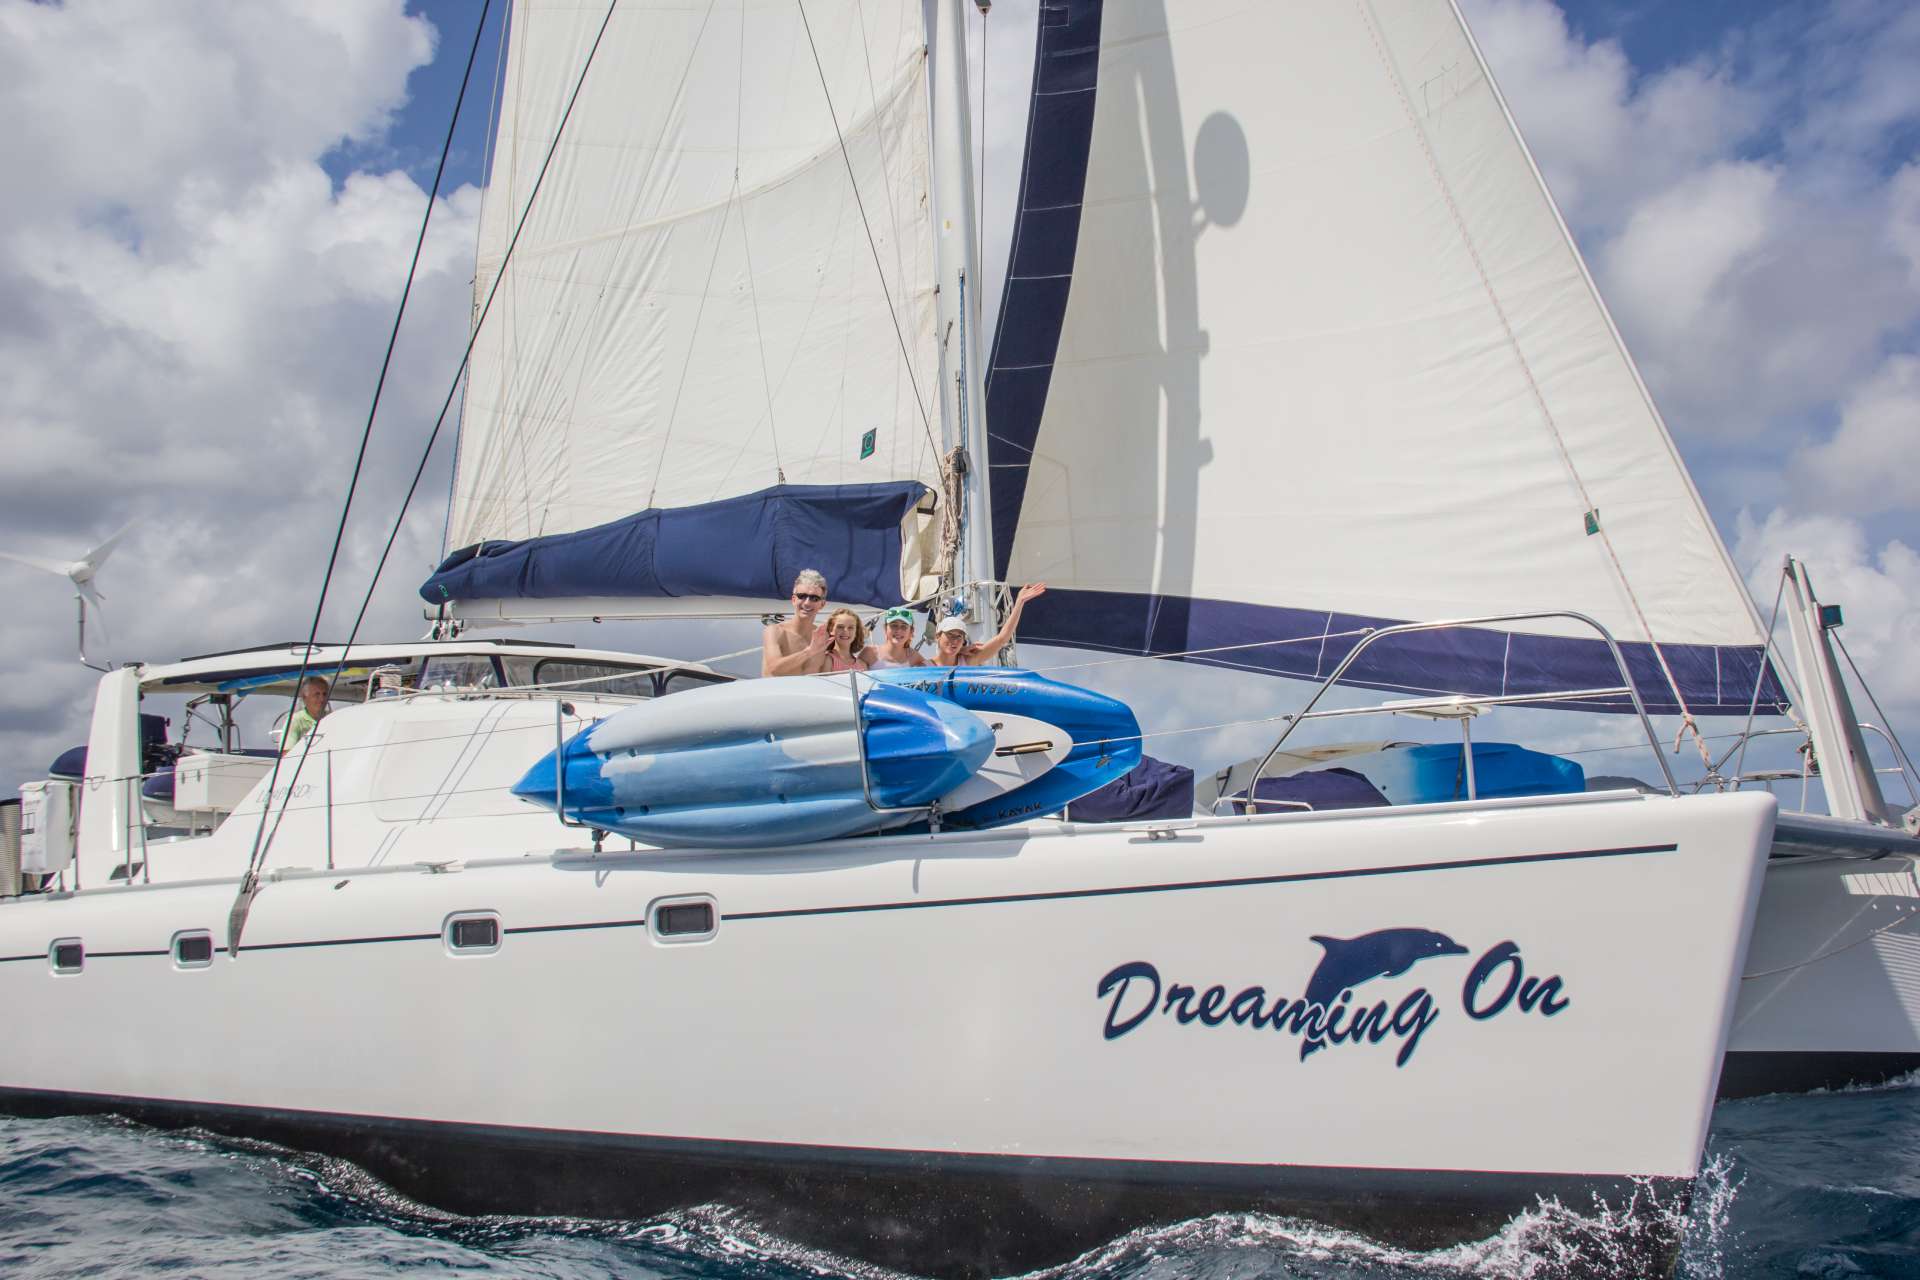 dreaming on - Yacht Charter Majorca & Boat hire in Central america, Belize 2